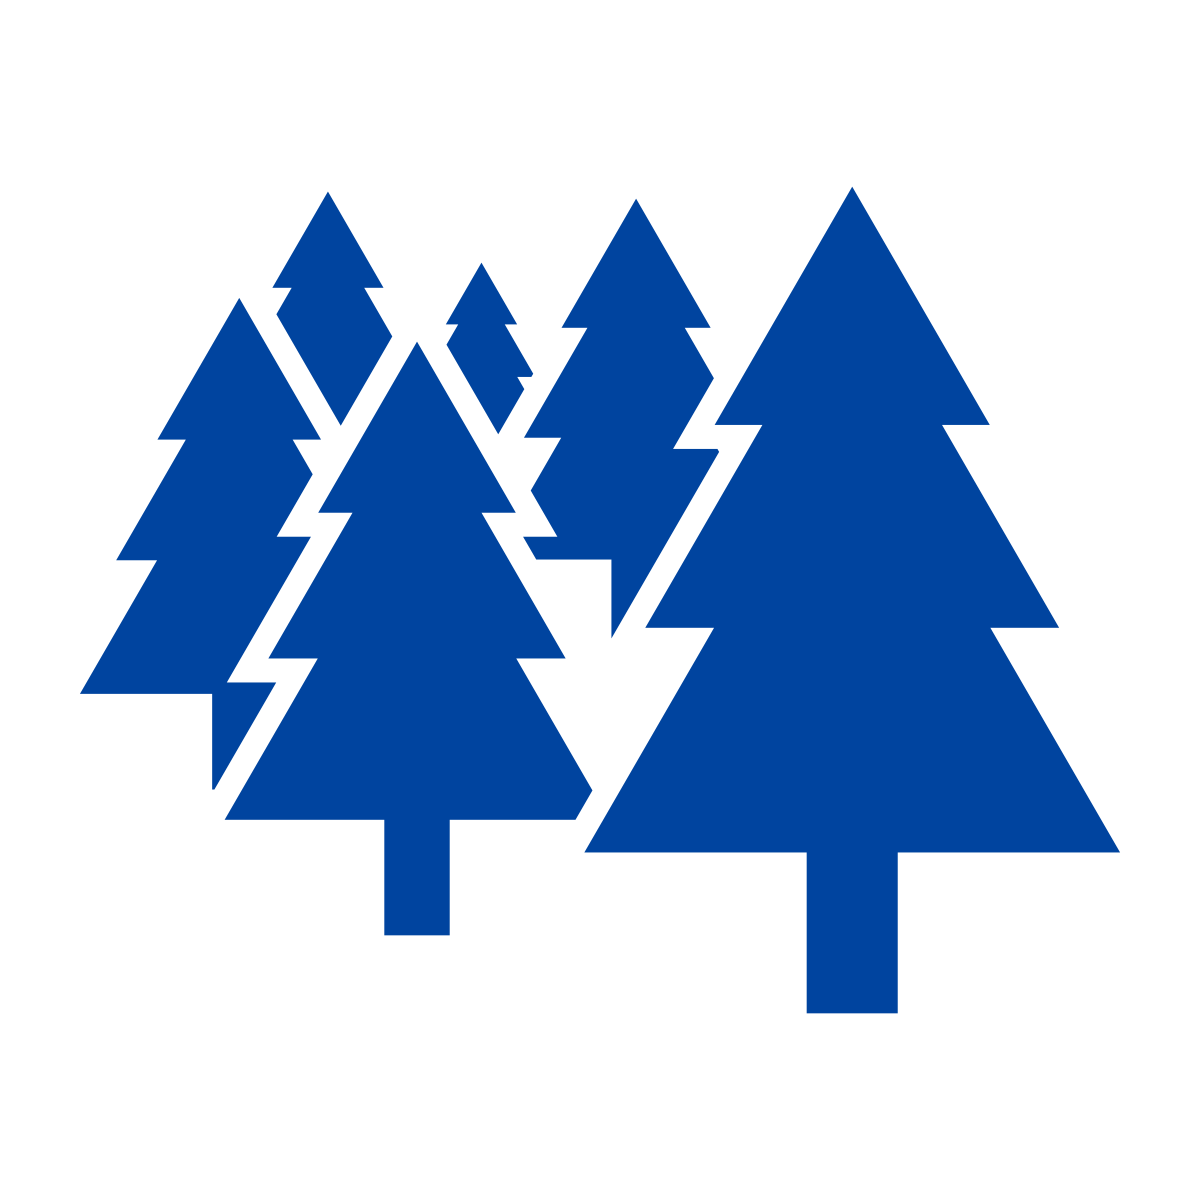 Blue icon depicting a collection of trees.